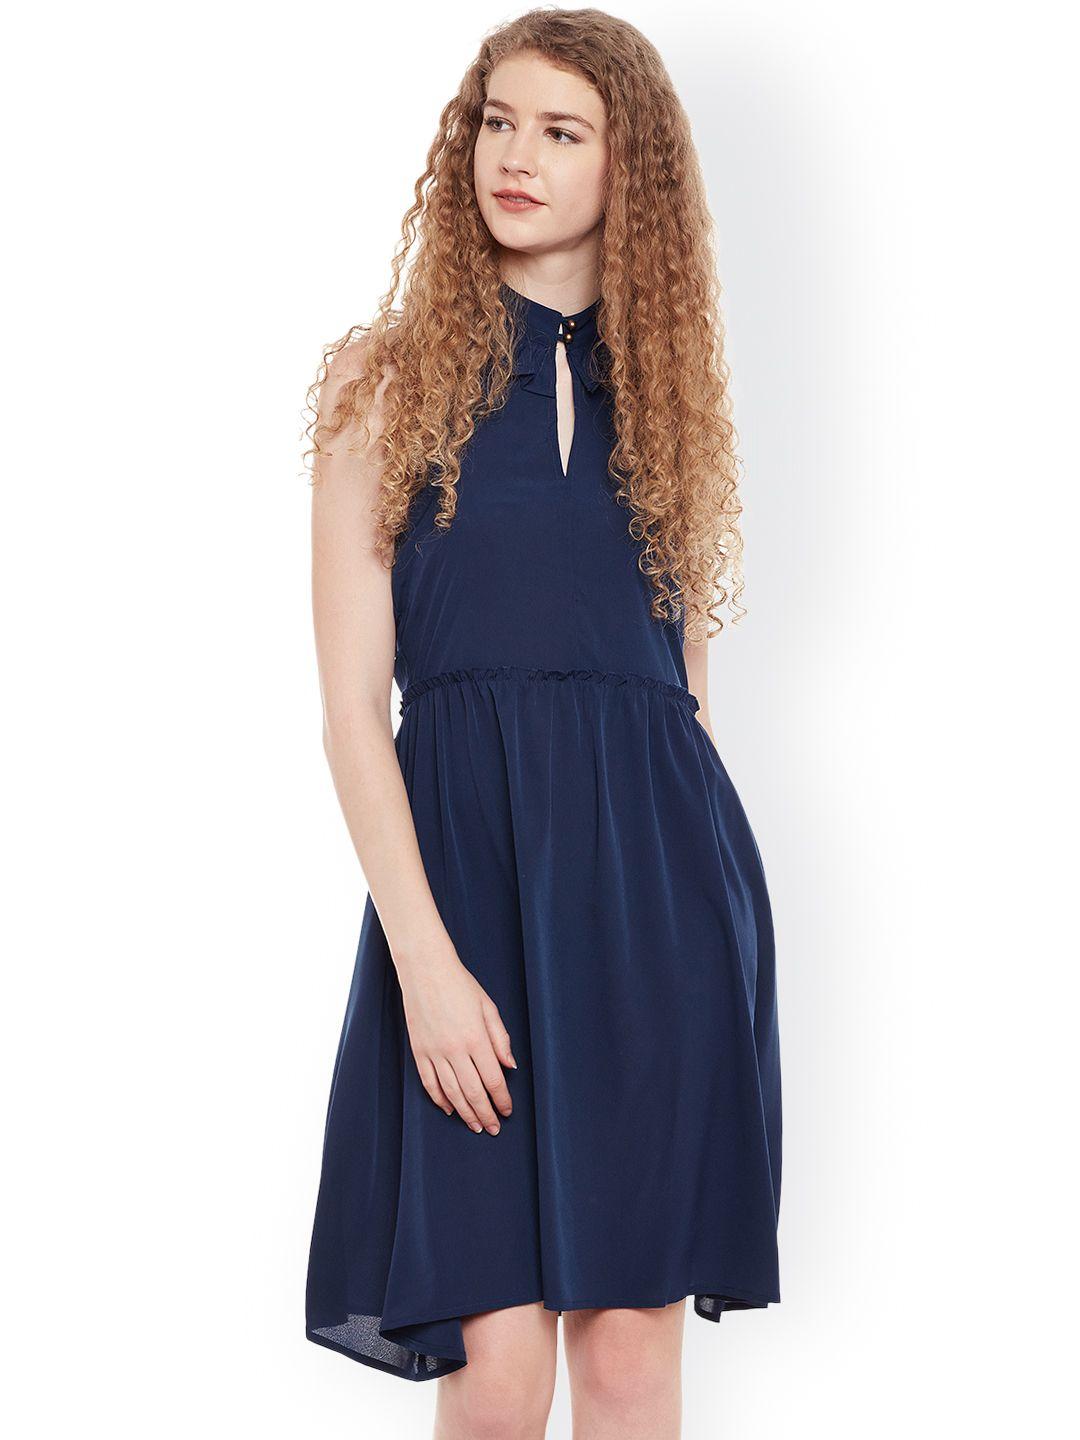 belle-fille-women-navy-solid-fit-and-flare-dress